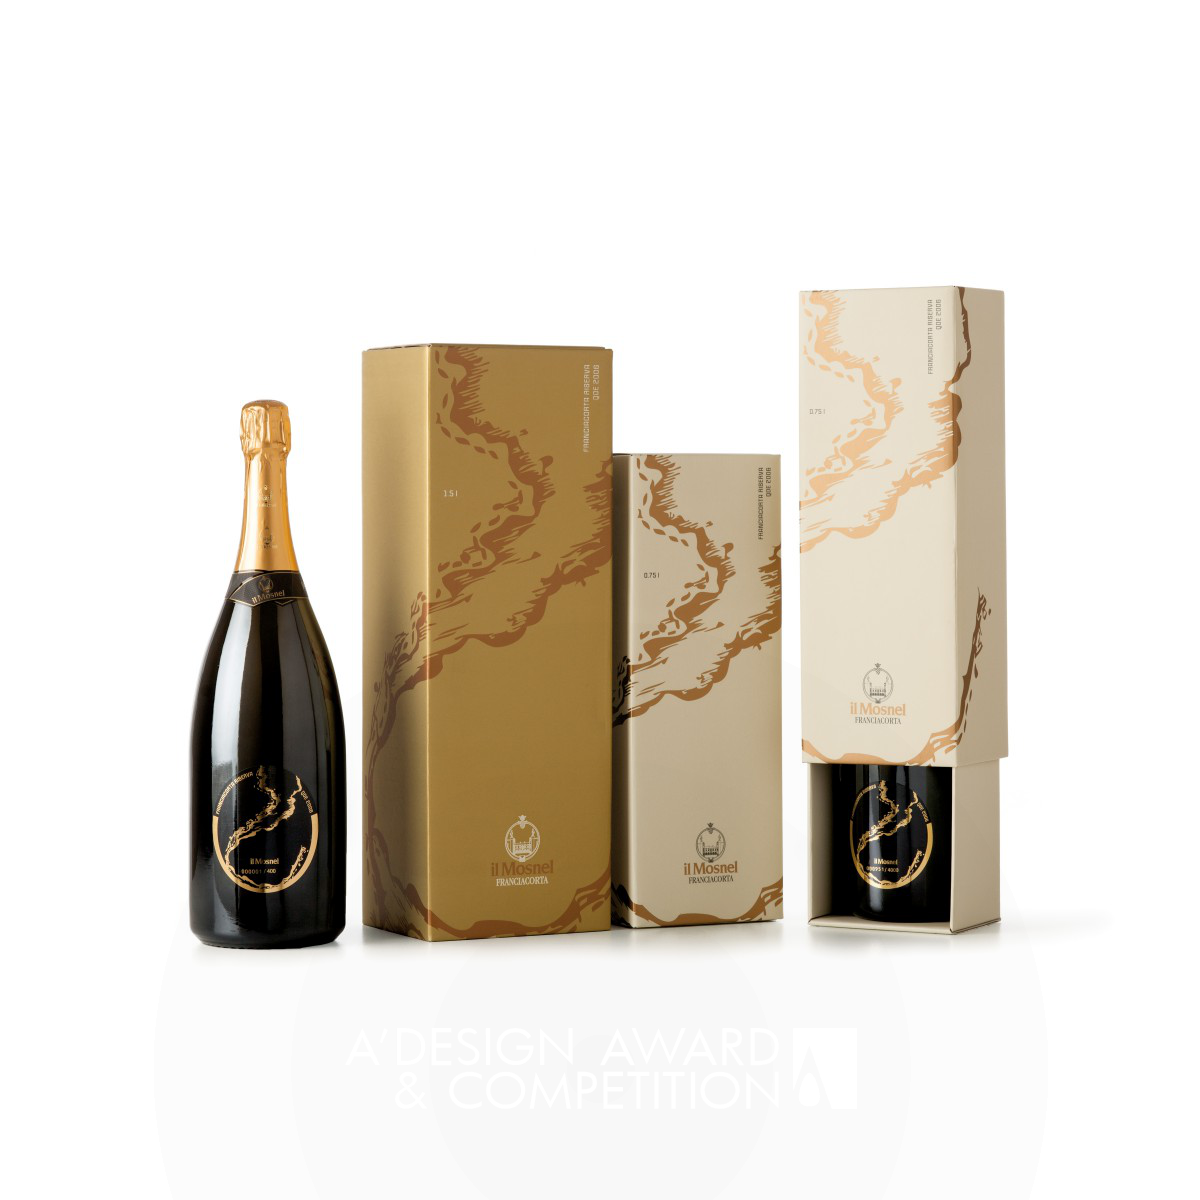 Il Mosnel QdE 2012 Sparkling Wine Label and Pack by Laura Ferrario